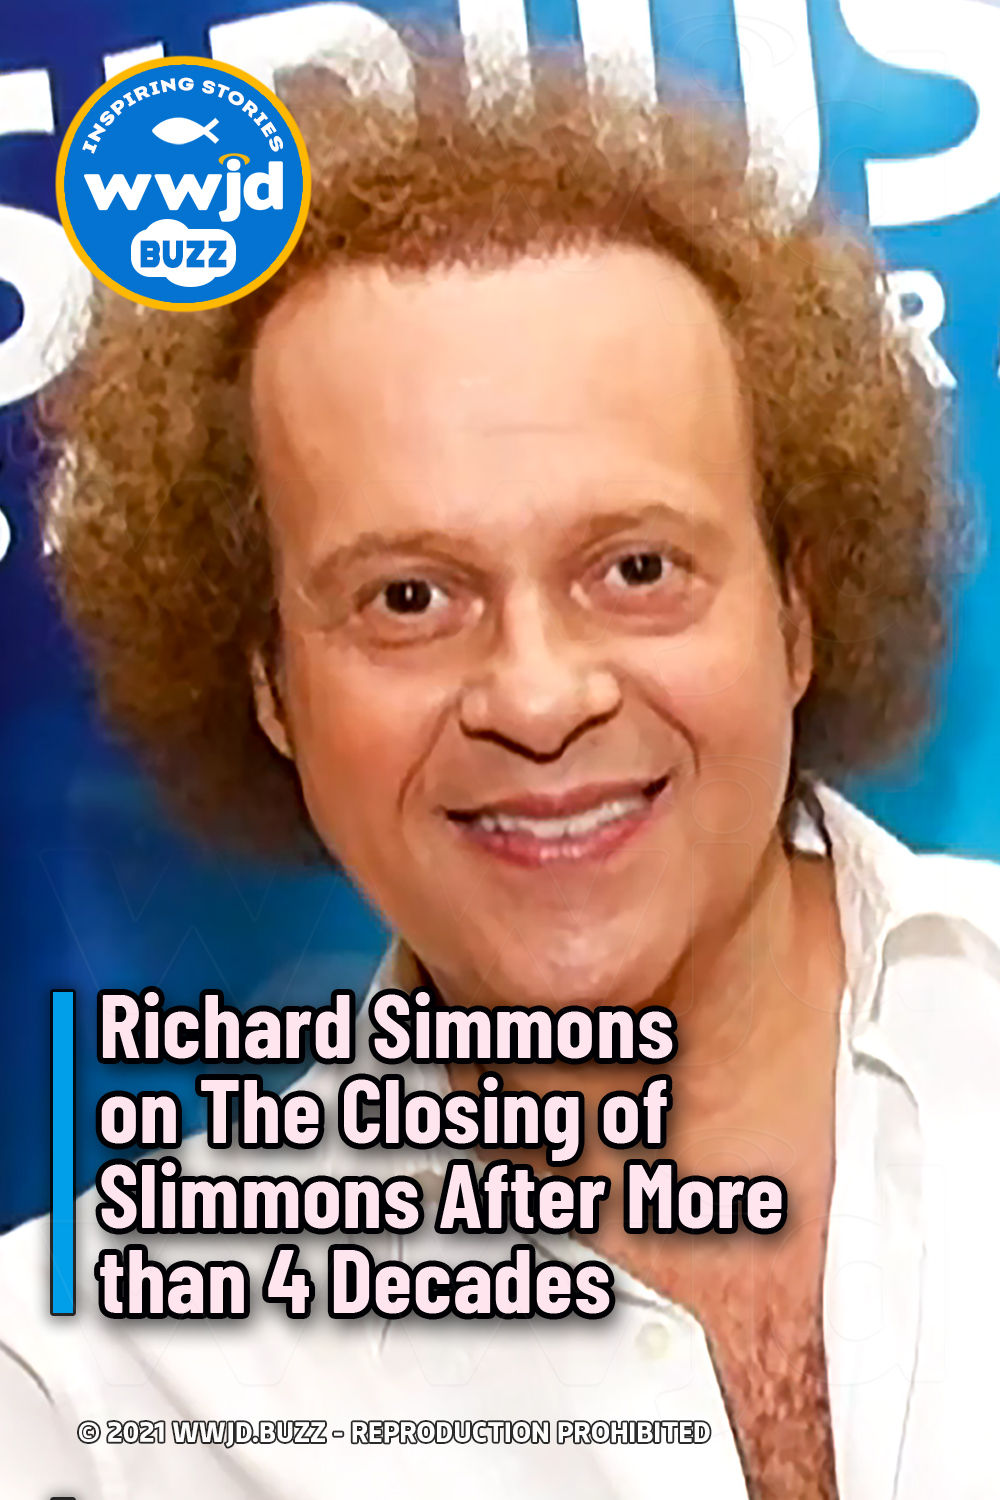 Richard Simmons on The Closing of Slimmons After More than 4 Decades